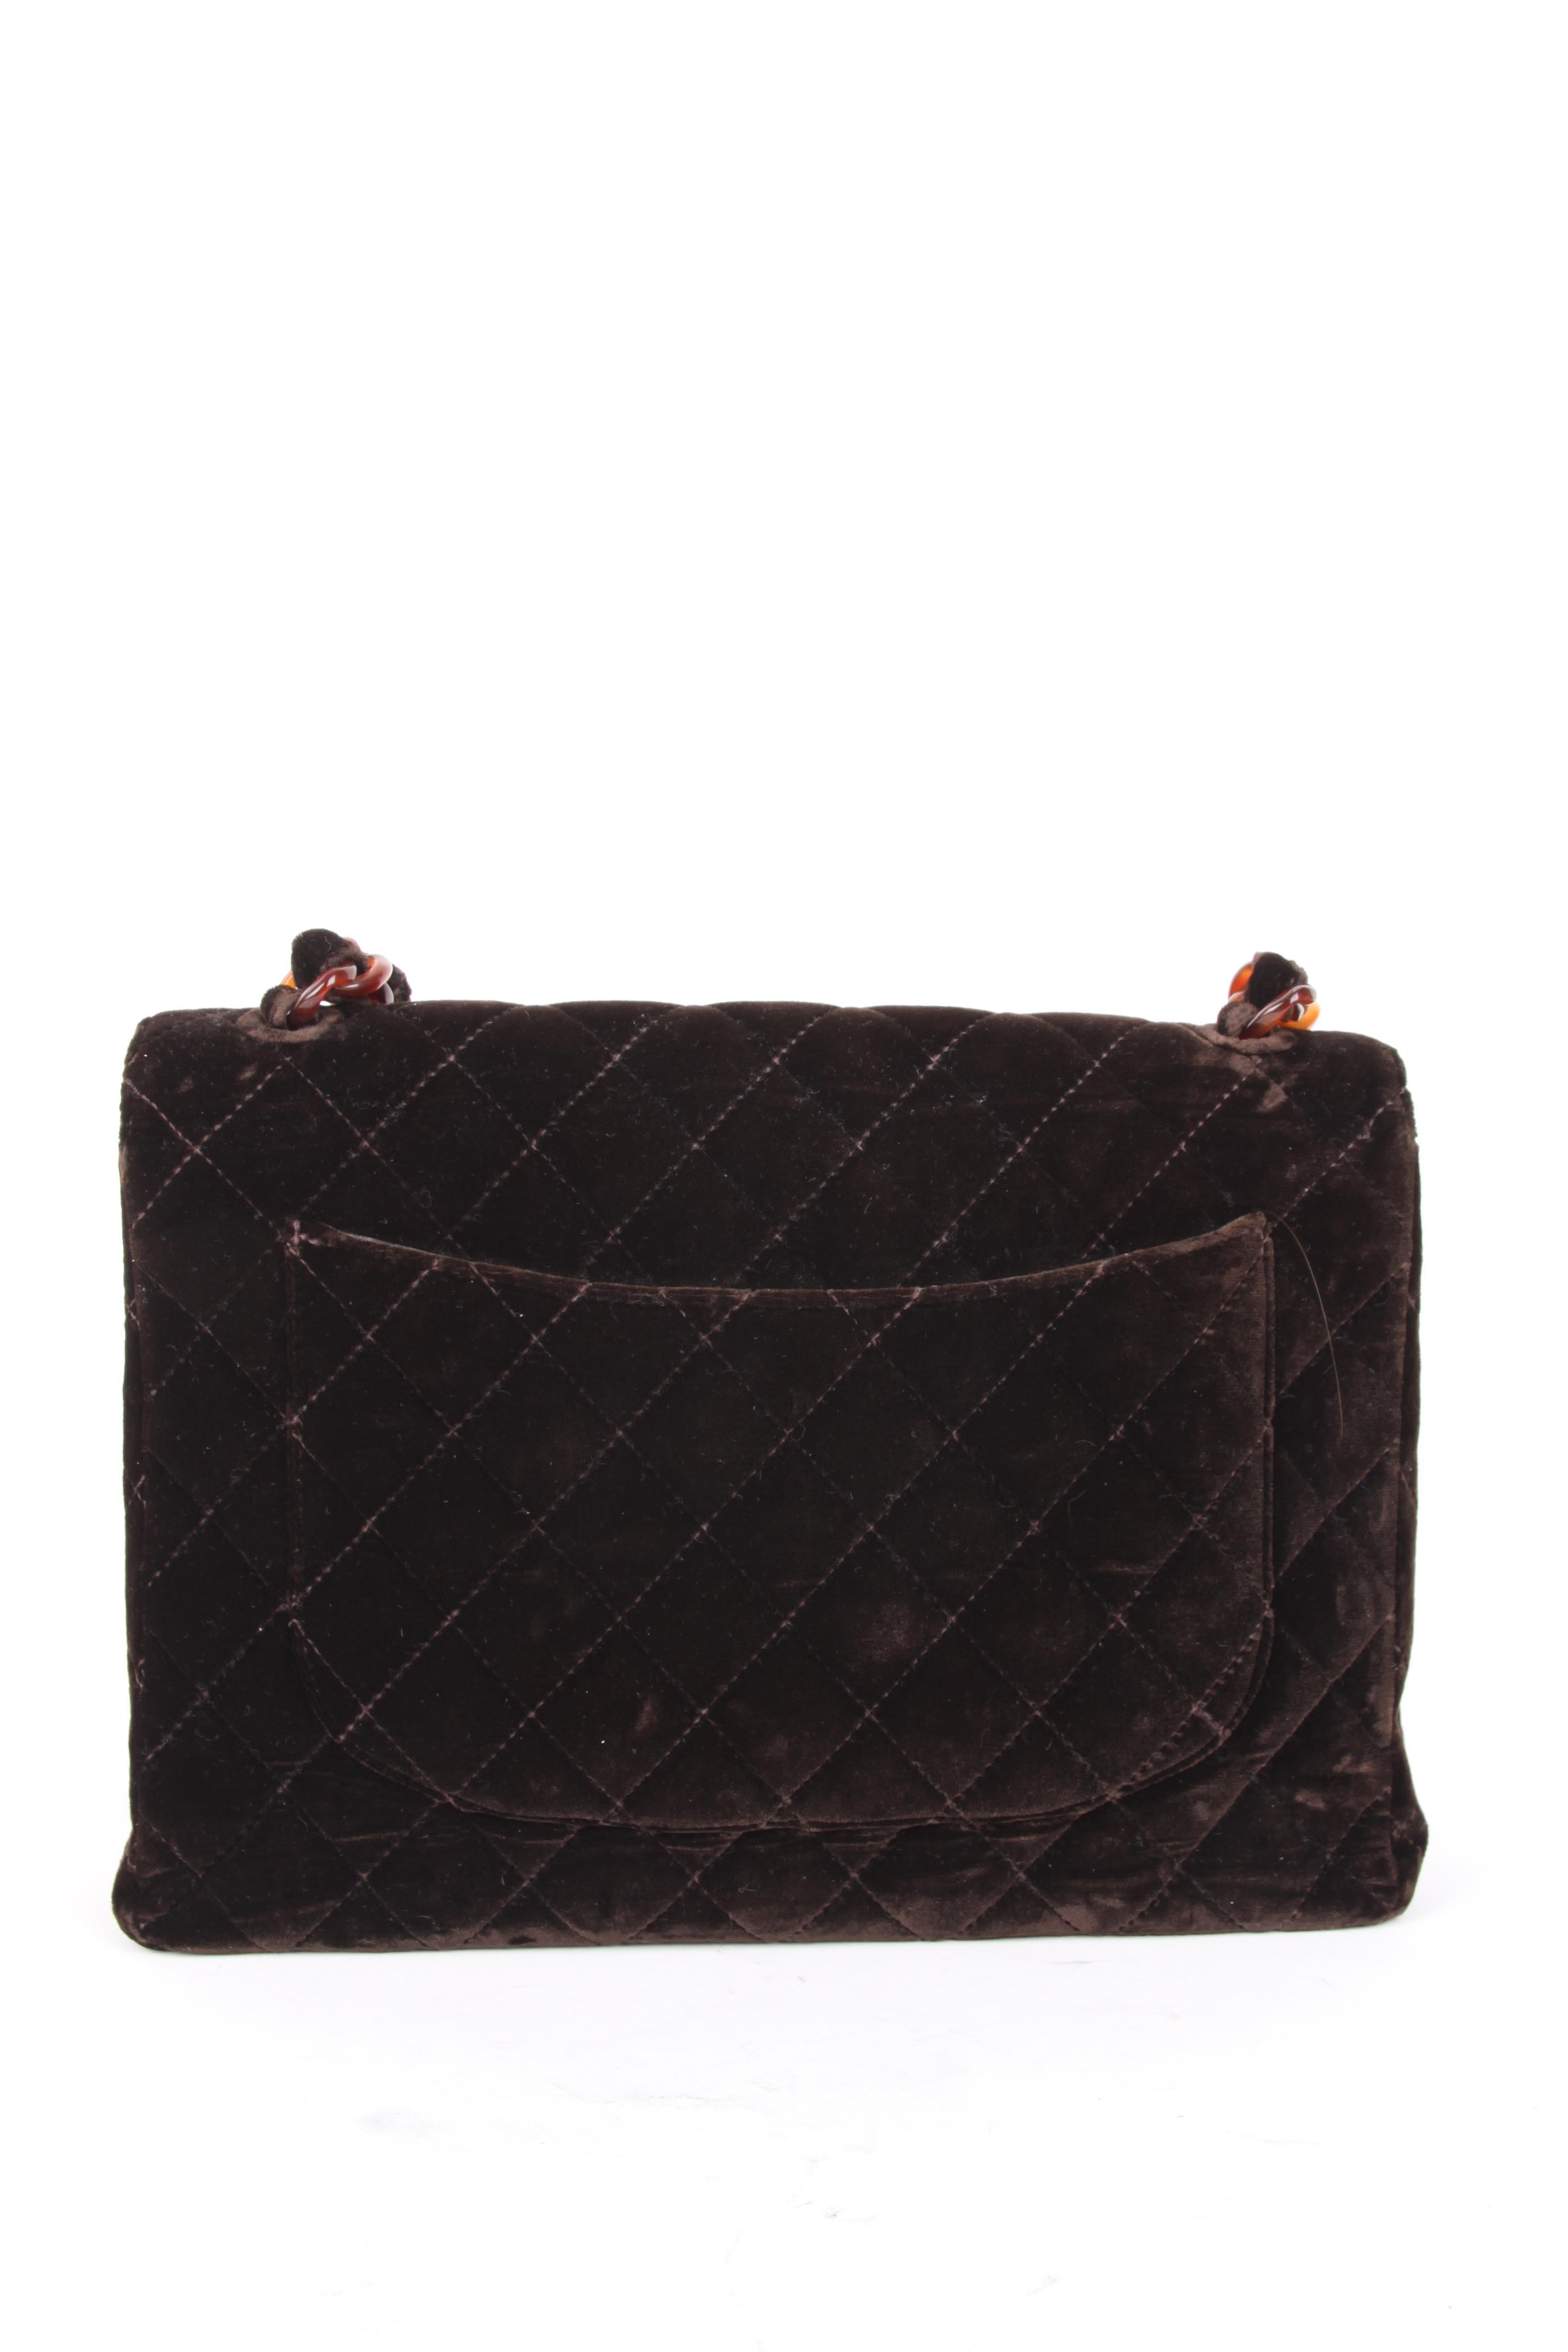 Chanel Brown Suede Quilted Tortoiseshell Hardware Flap Bag For Sale 4